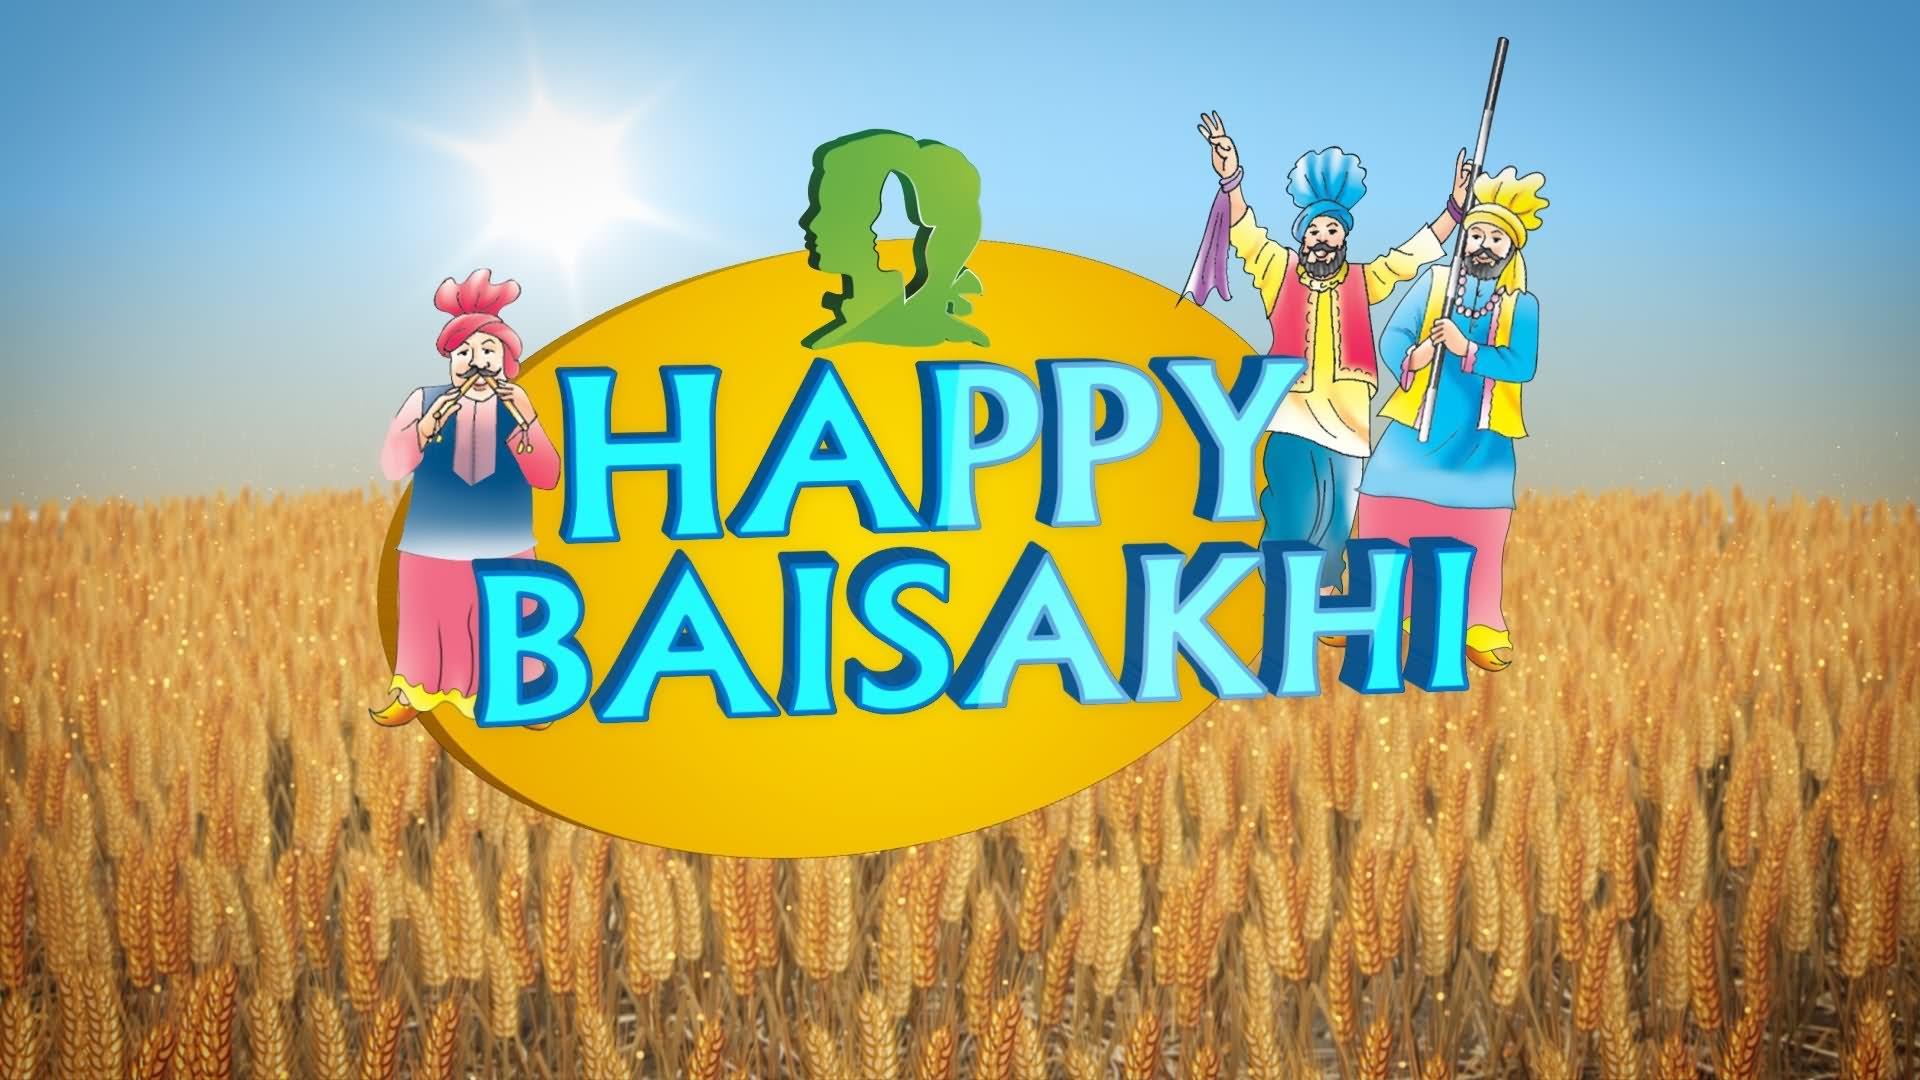 Most Wonderful Happy Vaisakhi Wish Picture And Image